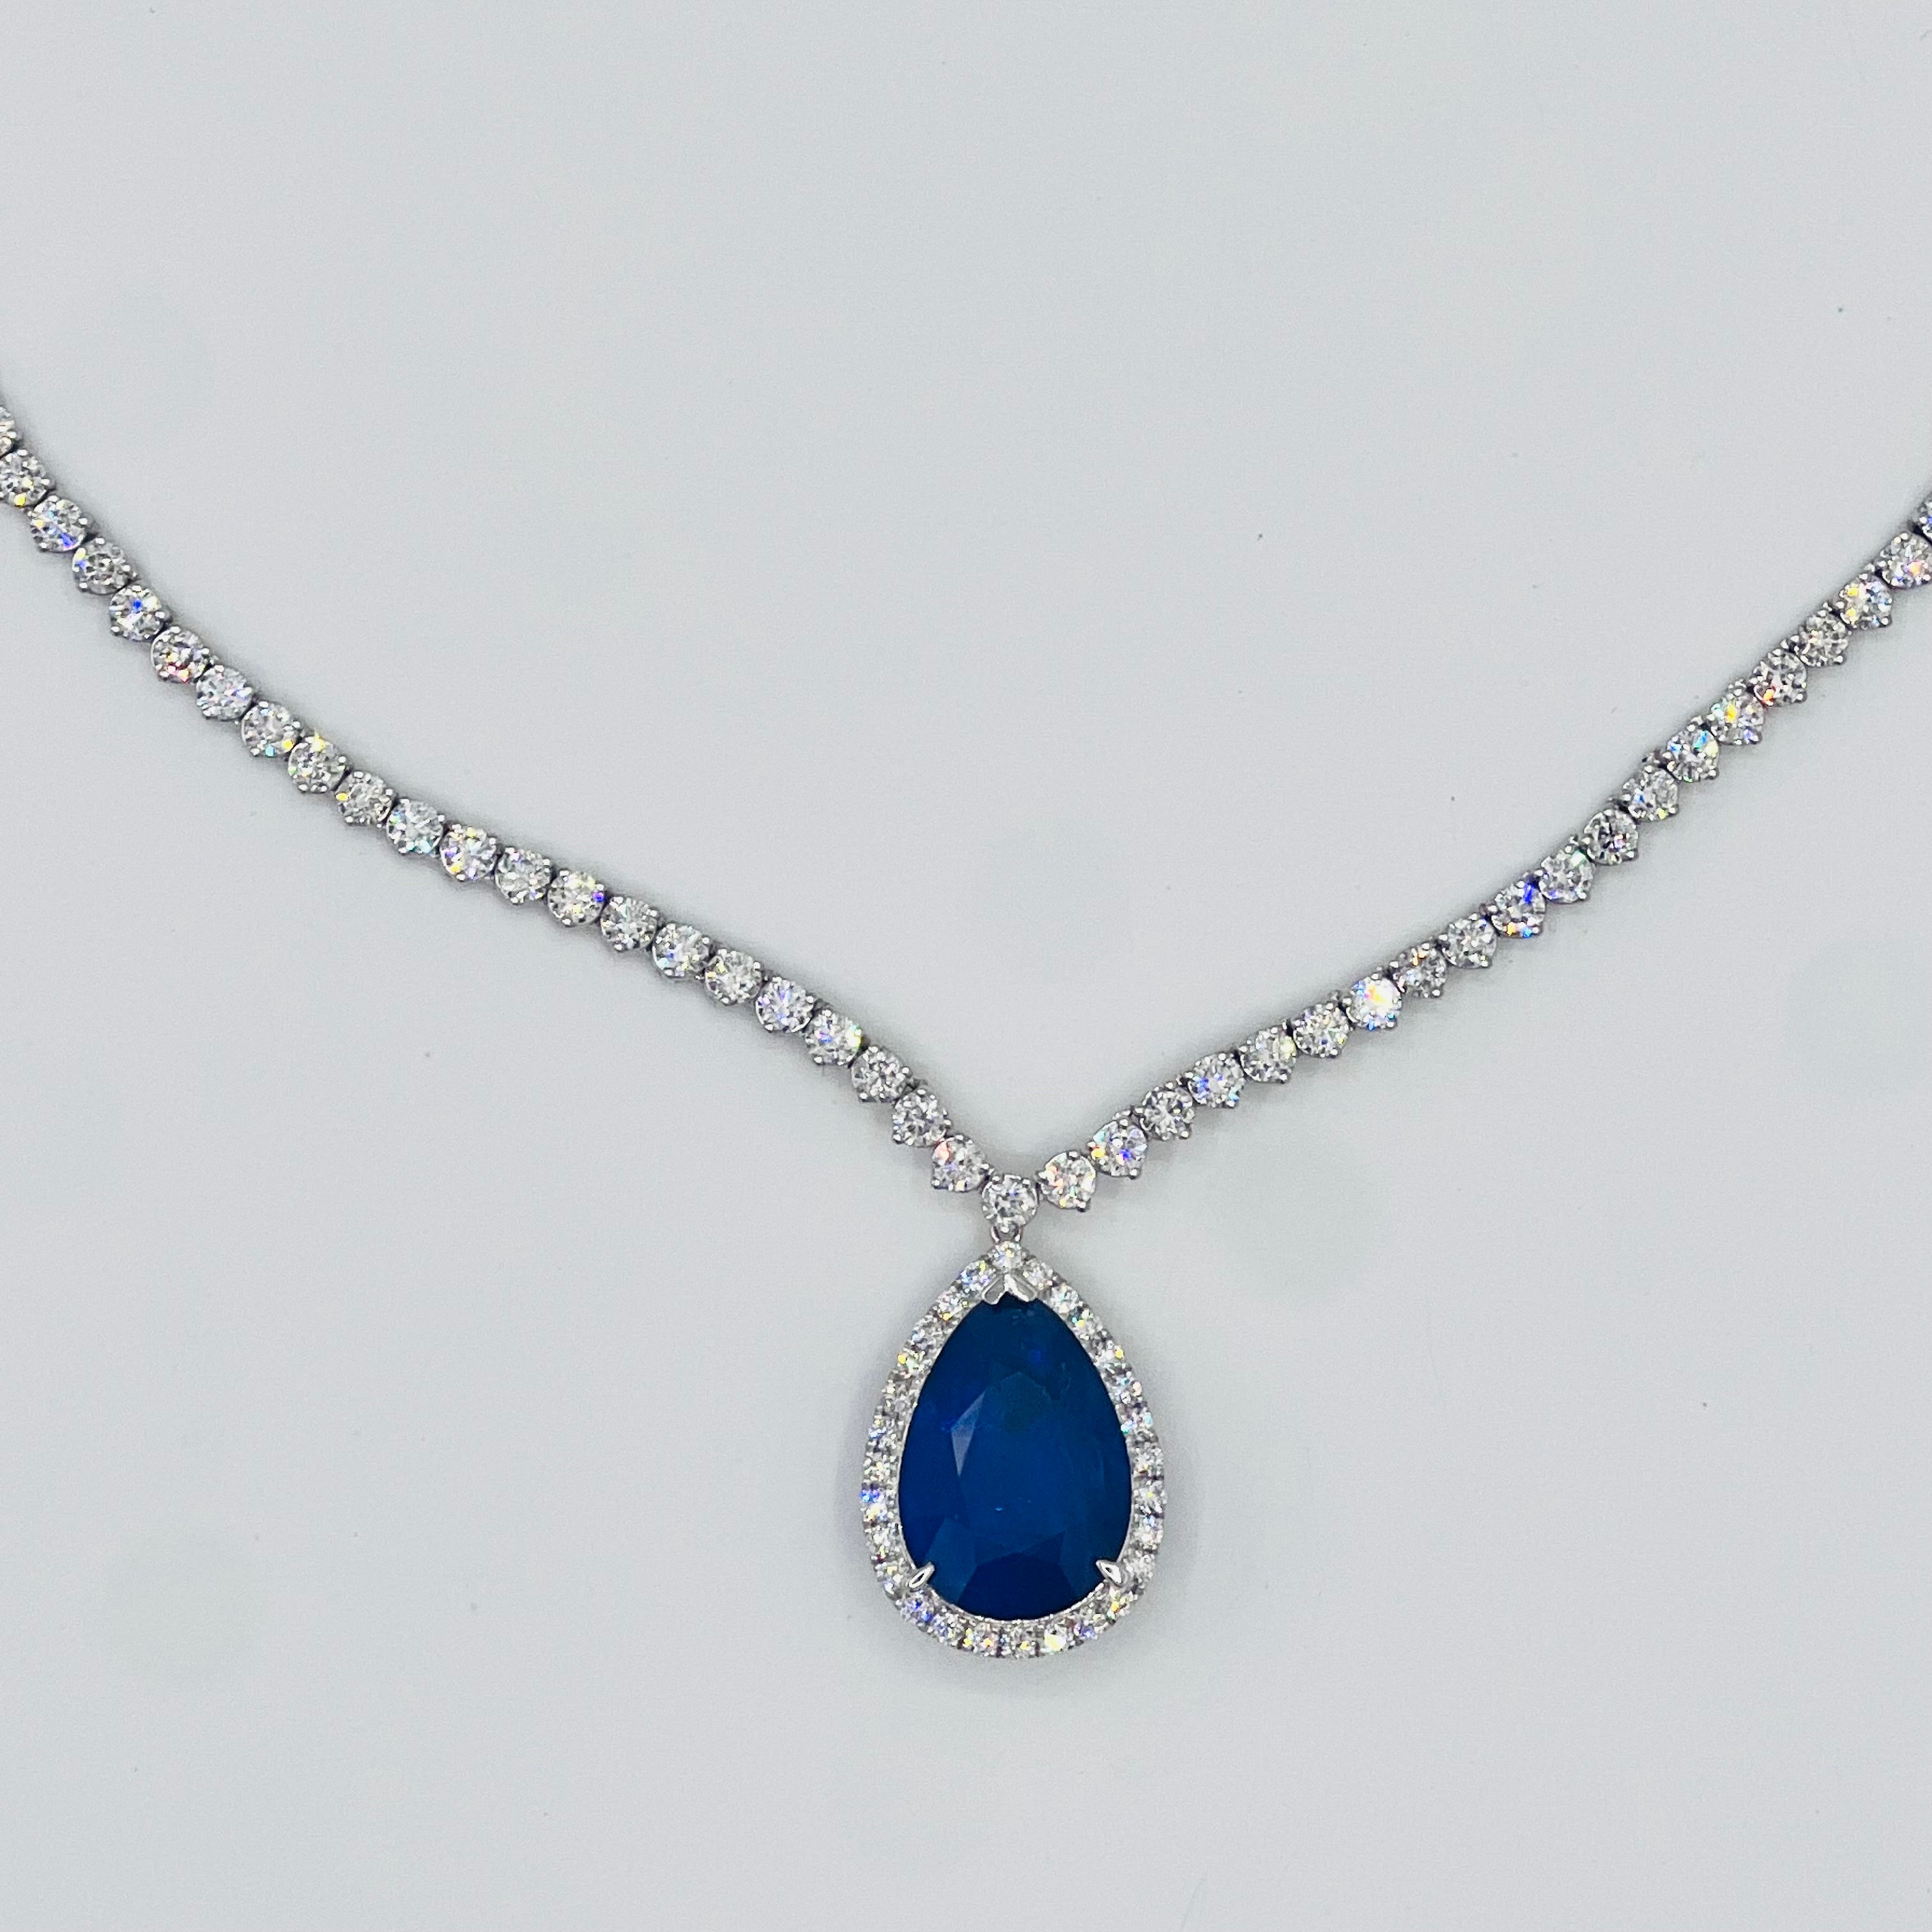 Necklace 18KW 1SAPP-17.546CT 28RD-0.79CT 129RD-11.6CT